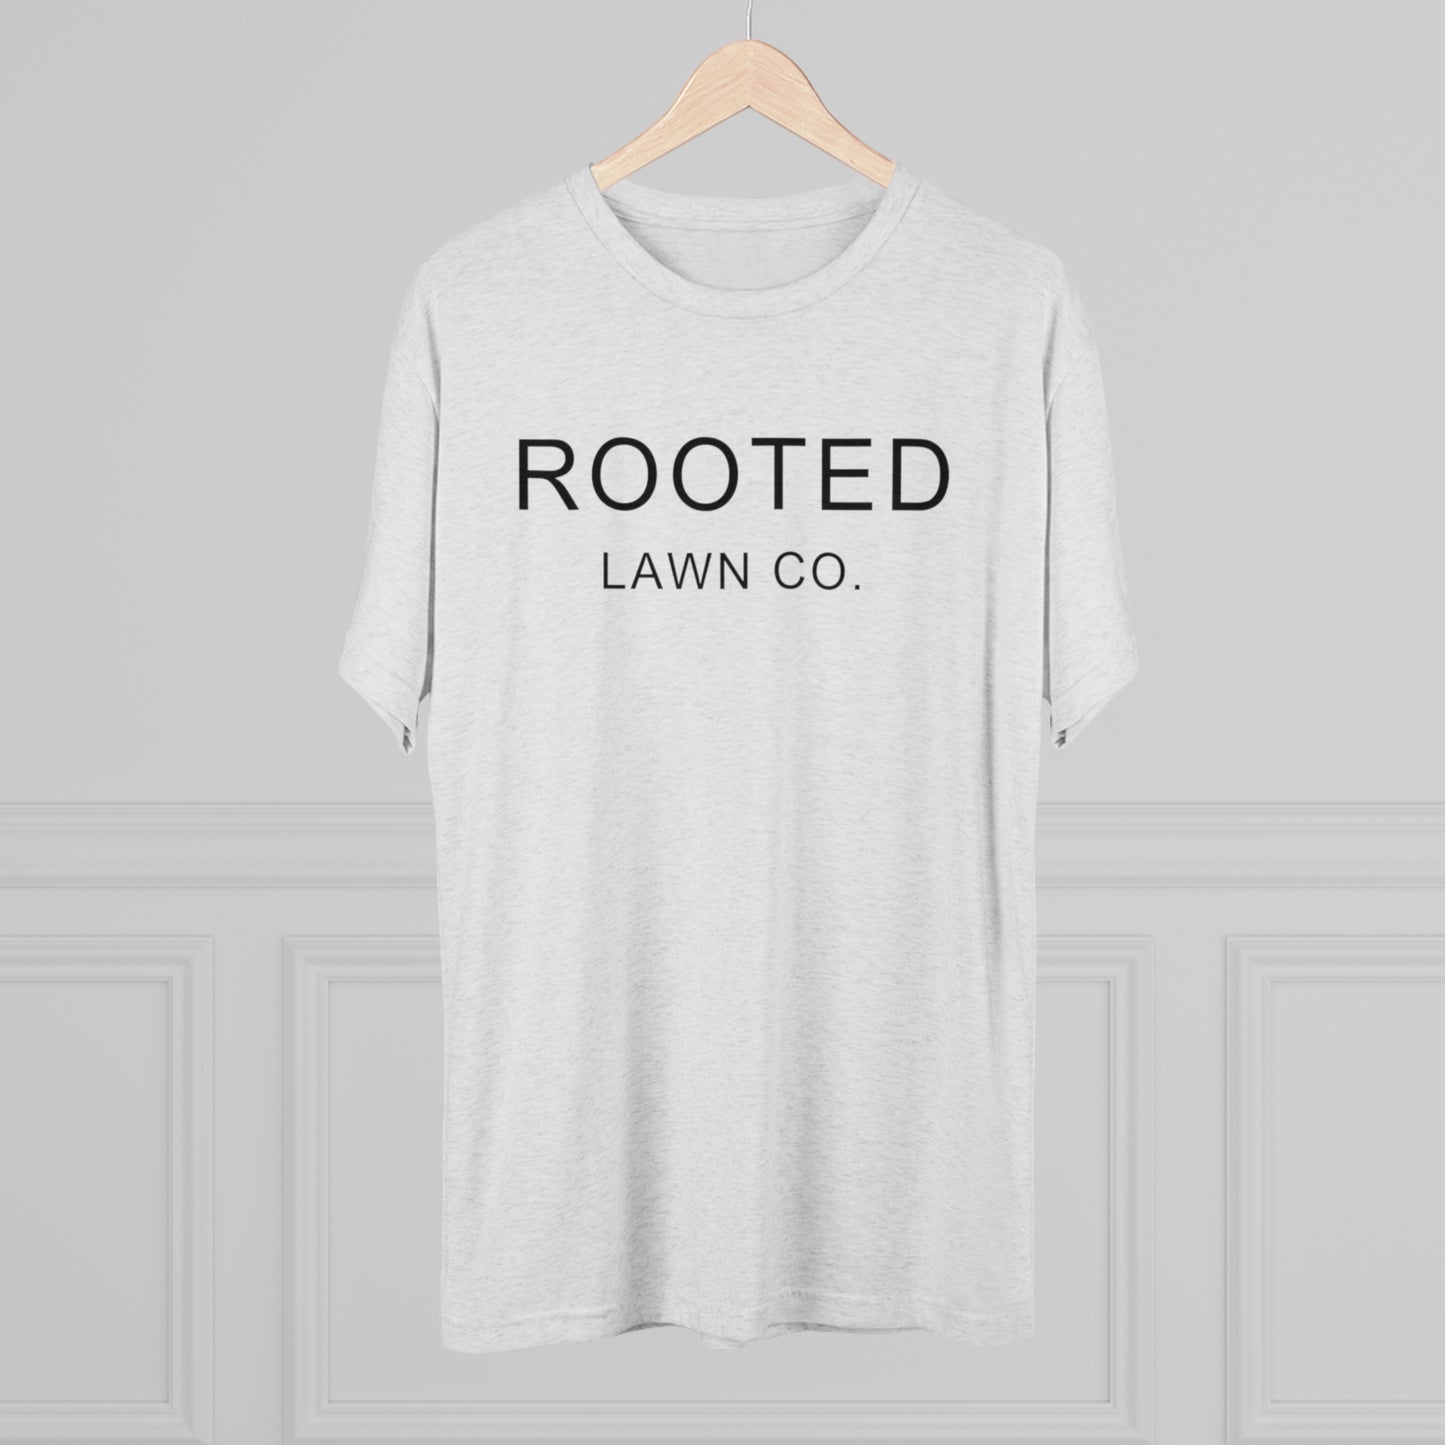 Rooted Lawn Co Shirt